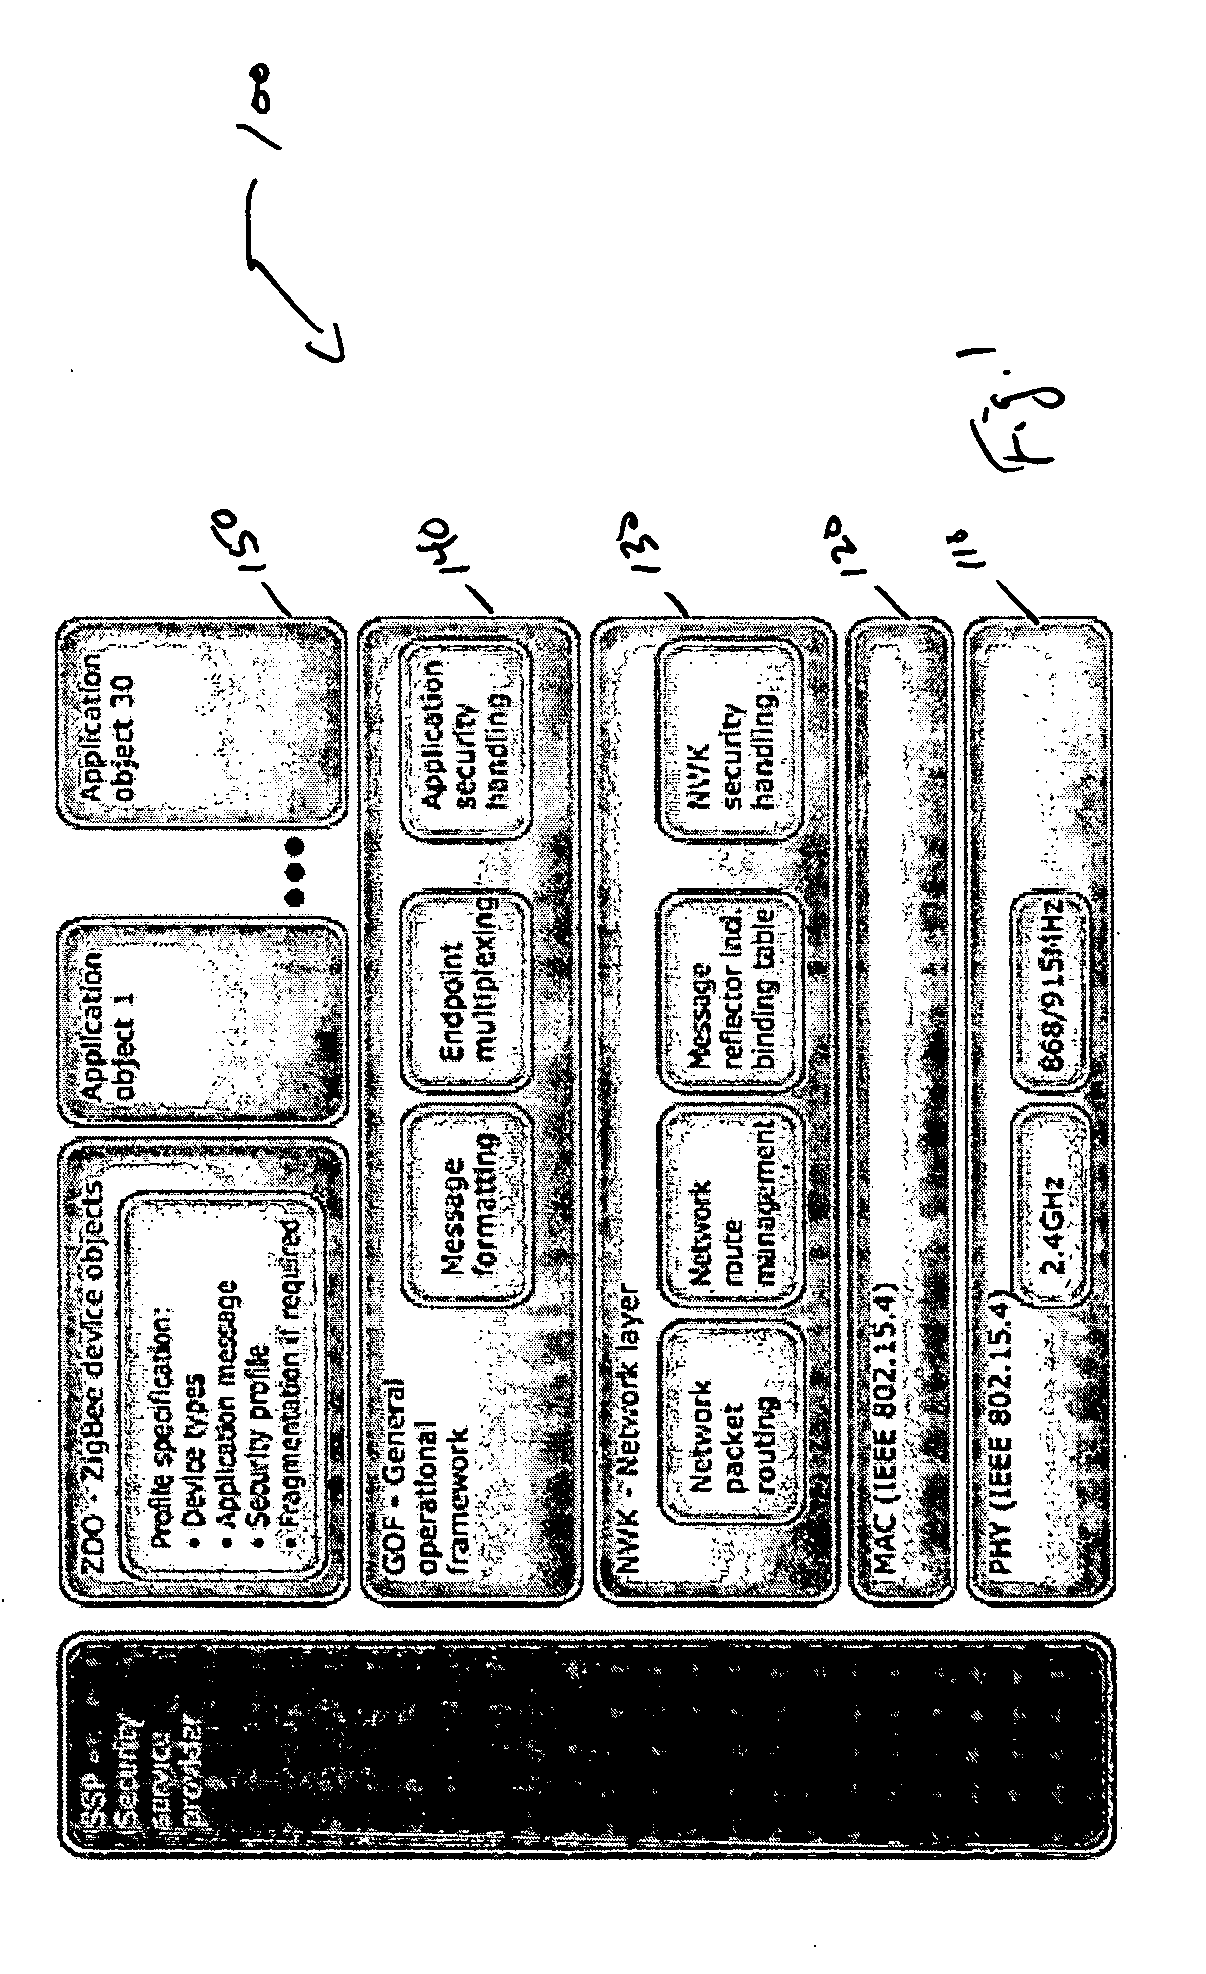 Methods and apparatuses for routing data in a personal area network